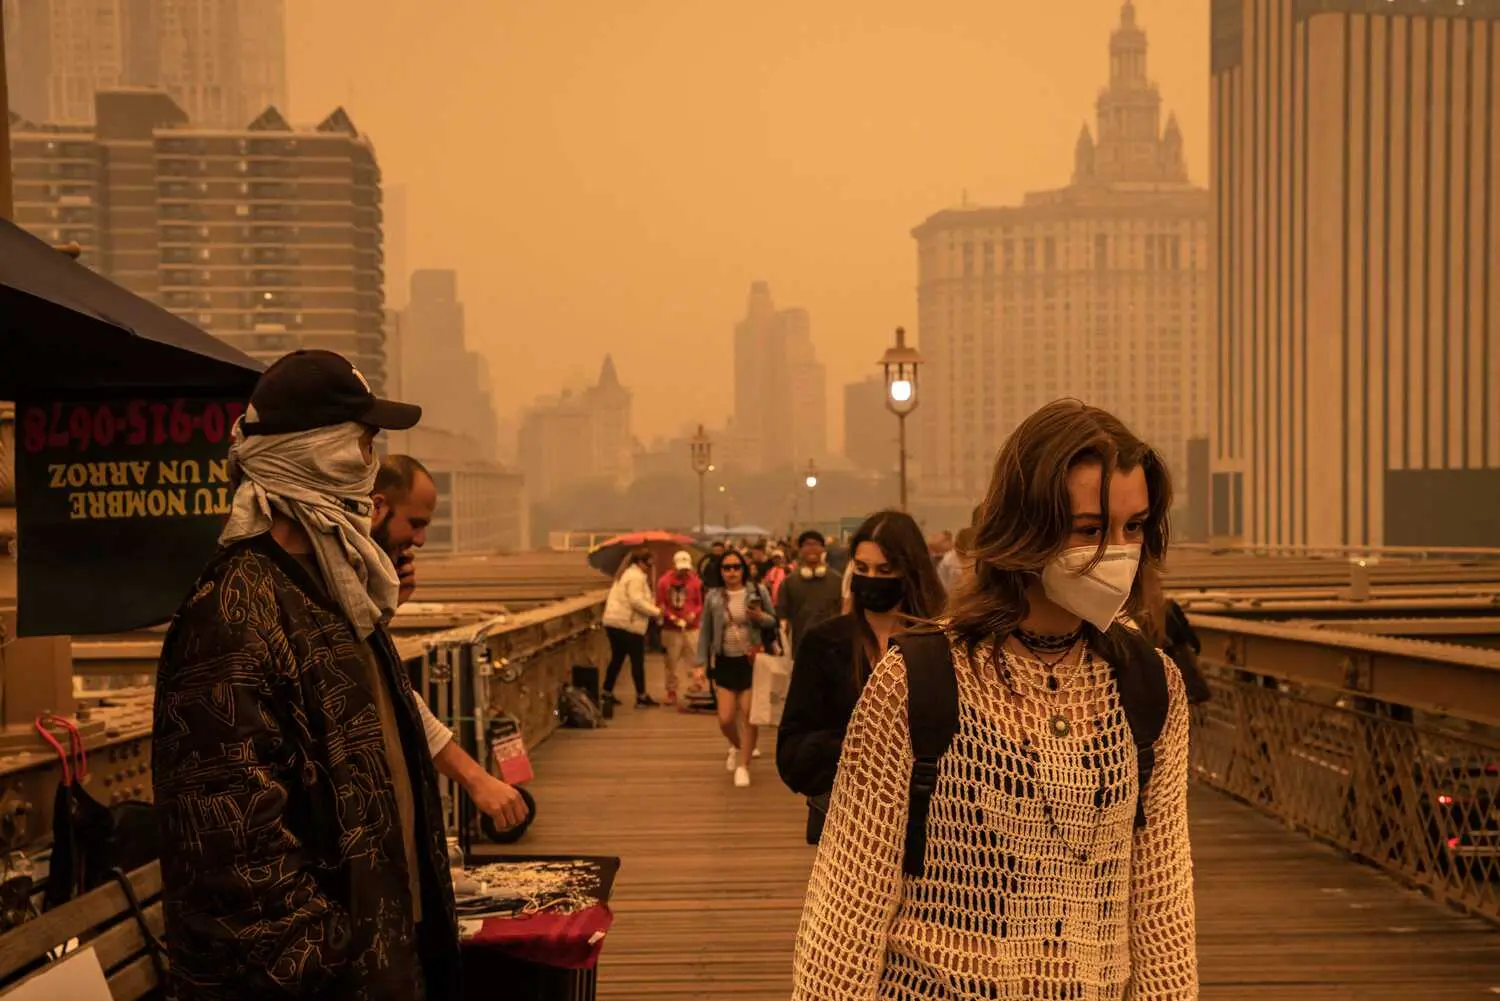 People in New York City walk through the thick smoke caused by wildfires in Canada. Photo: The New York Times